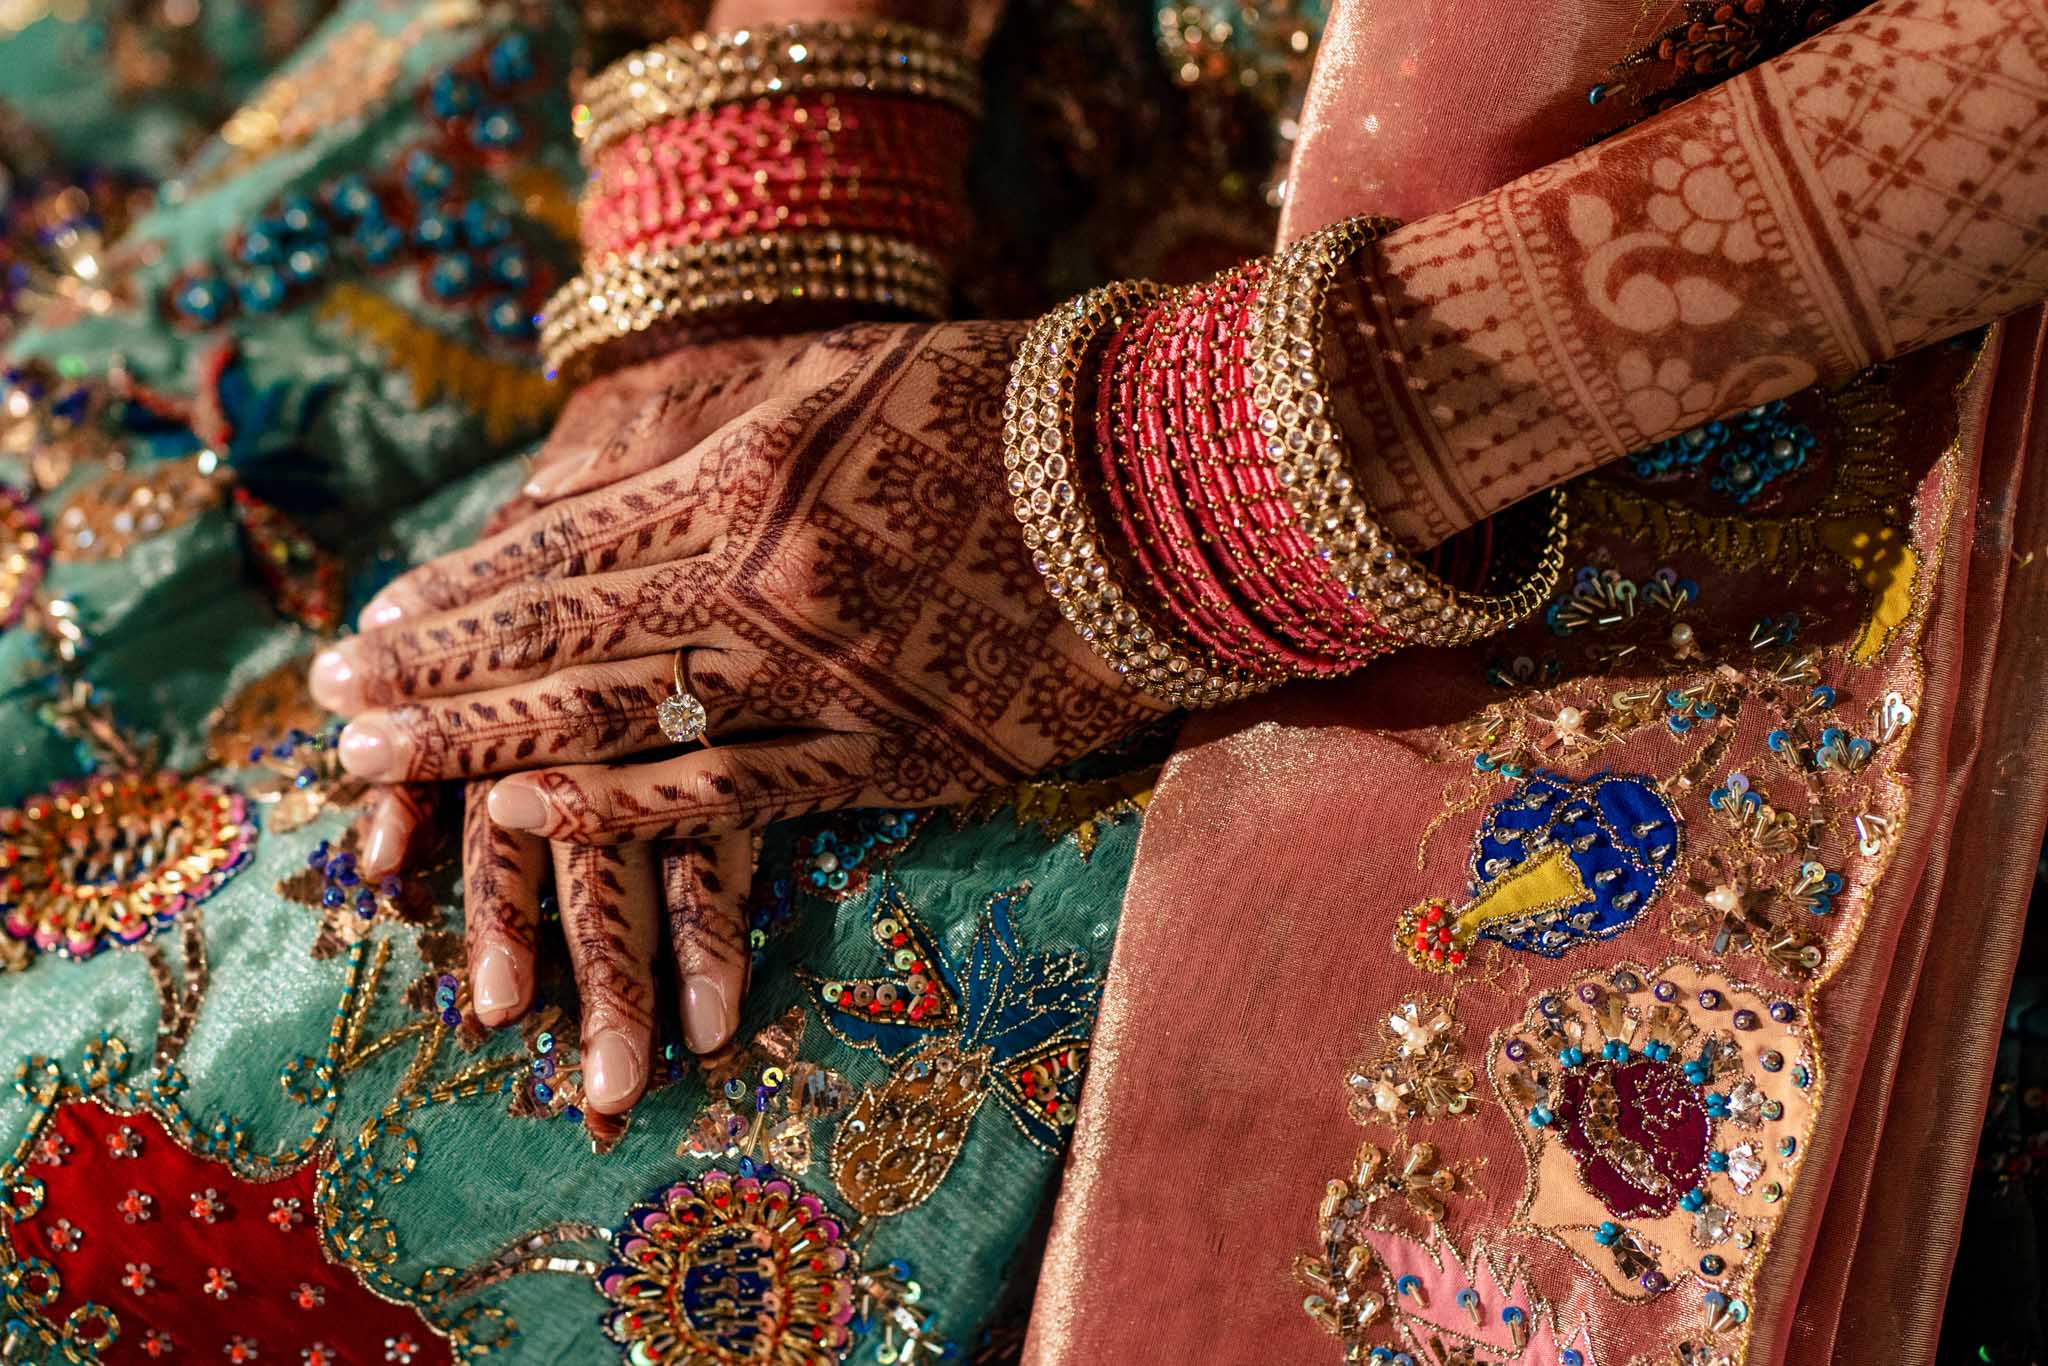 An Indian bride's hands are decorated with henna at a Biltmore Estate wedding.